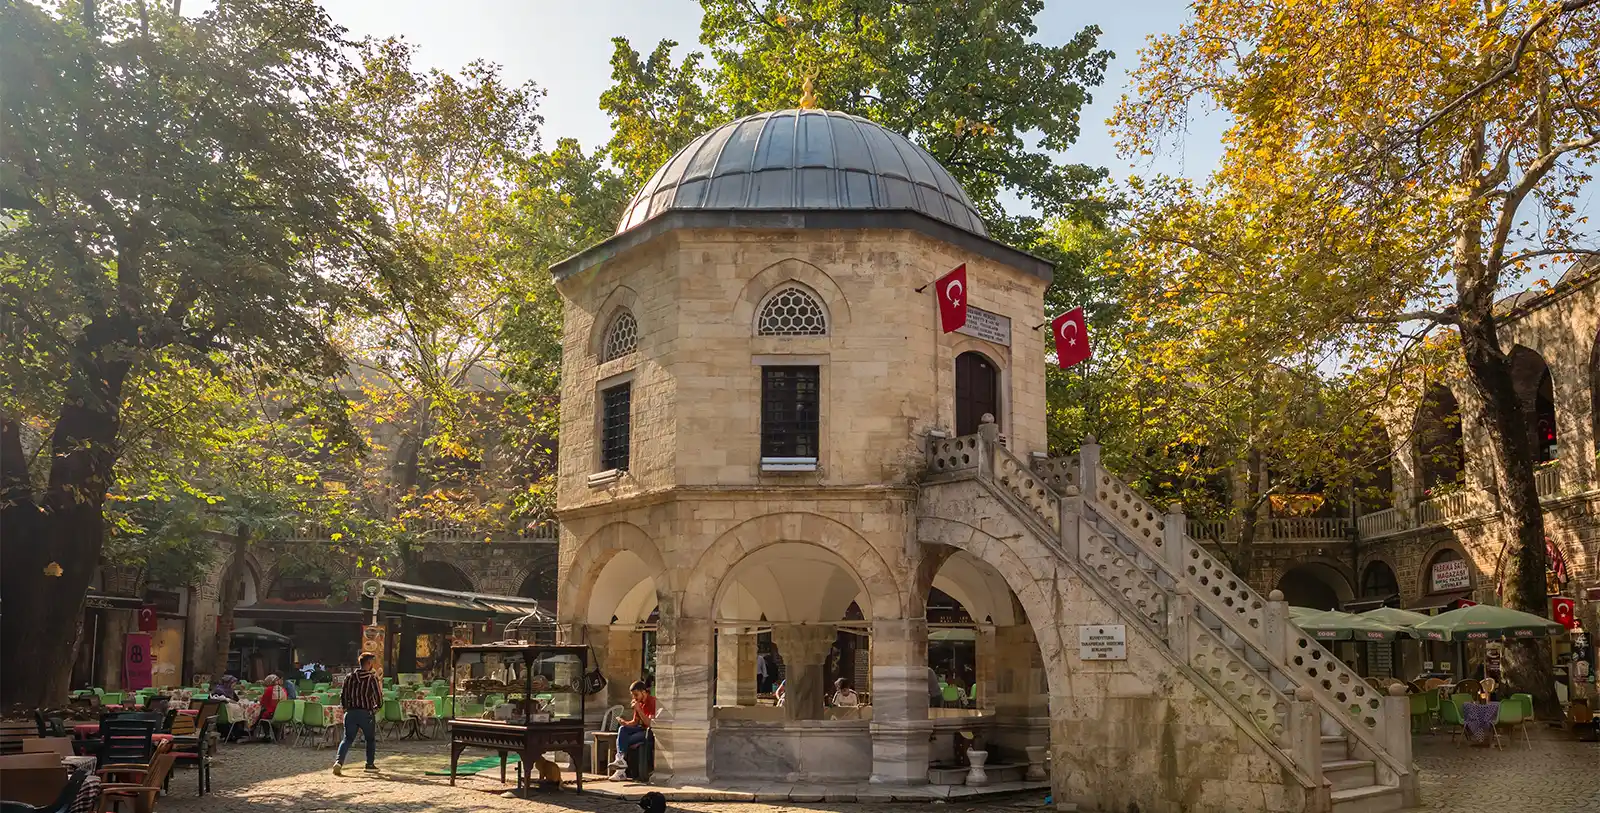 Bursa is a historic city with a long list of historical attractions